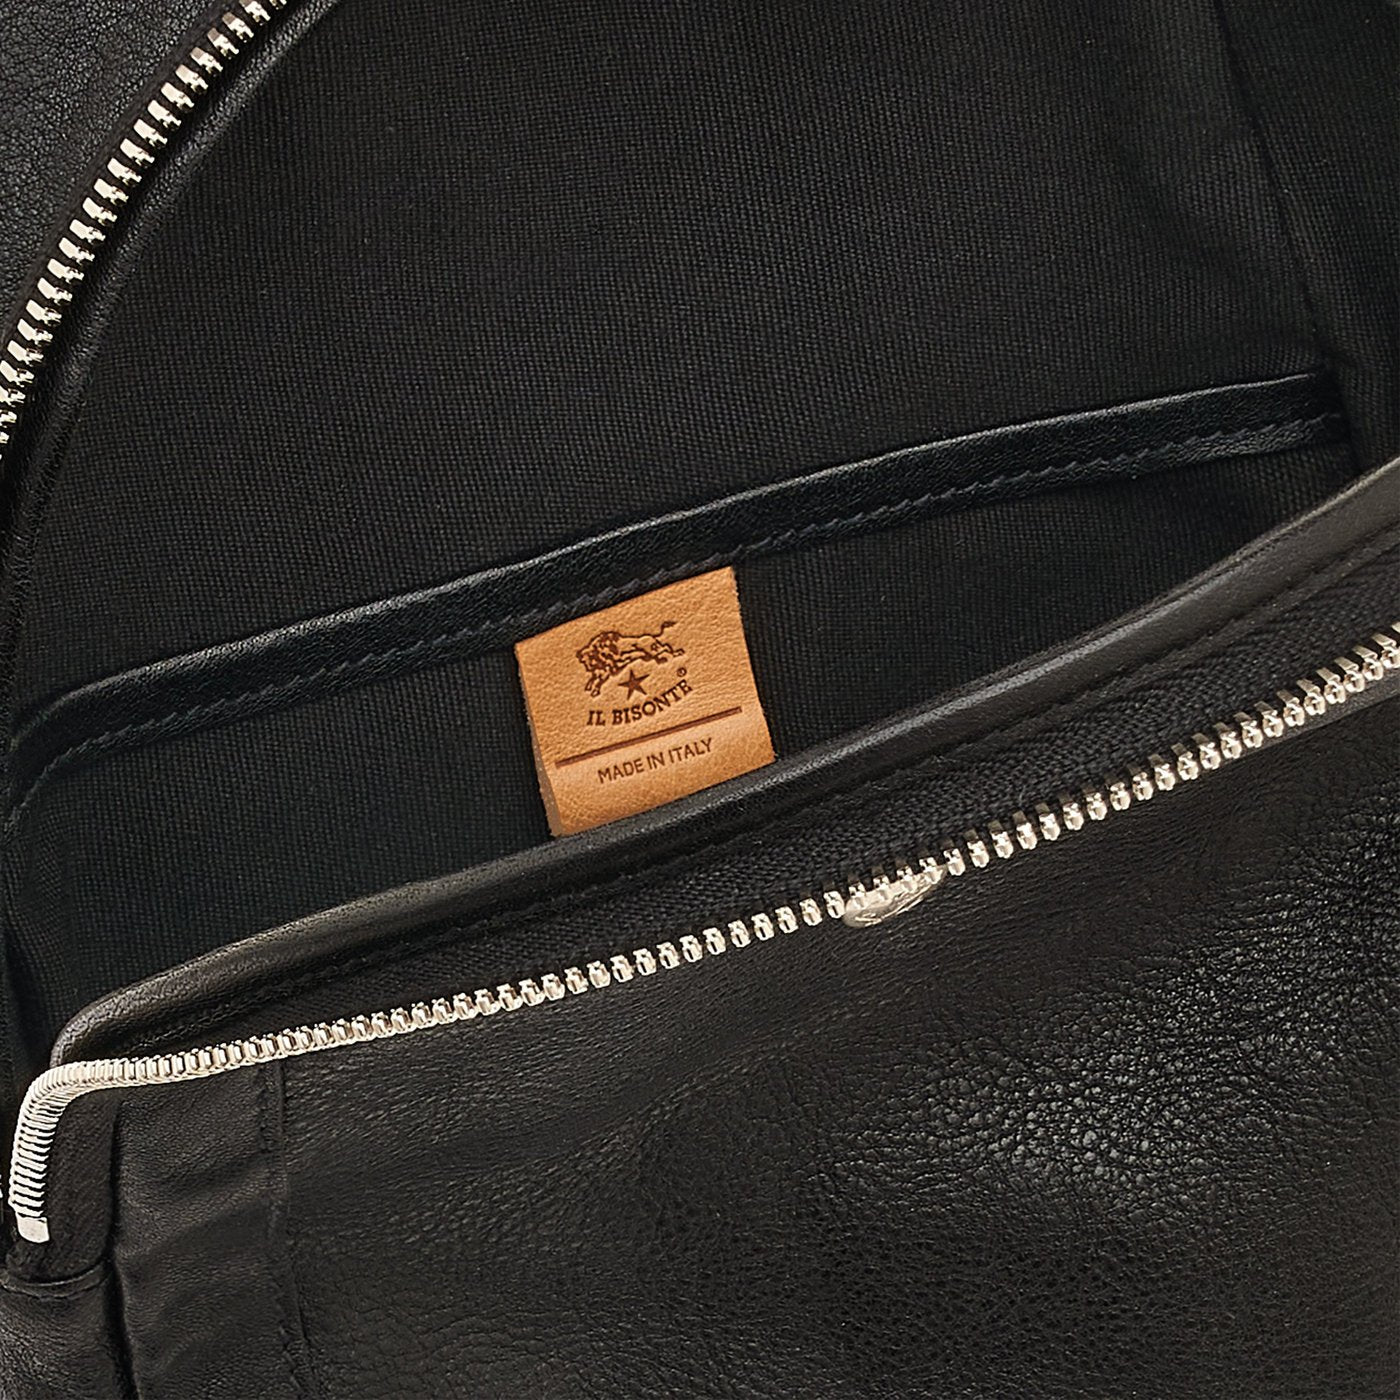 Sacs à dos homme cuir, Made in Italy